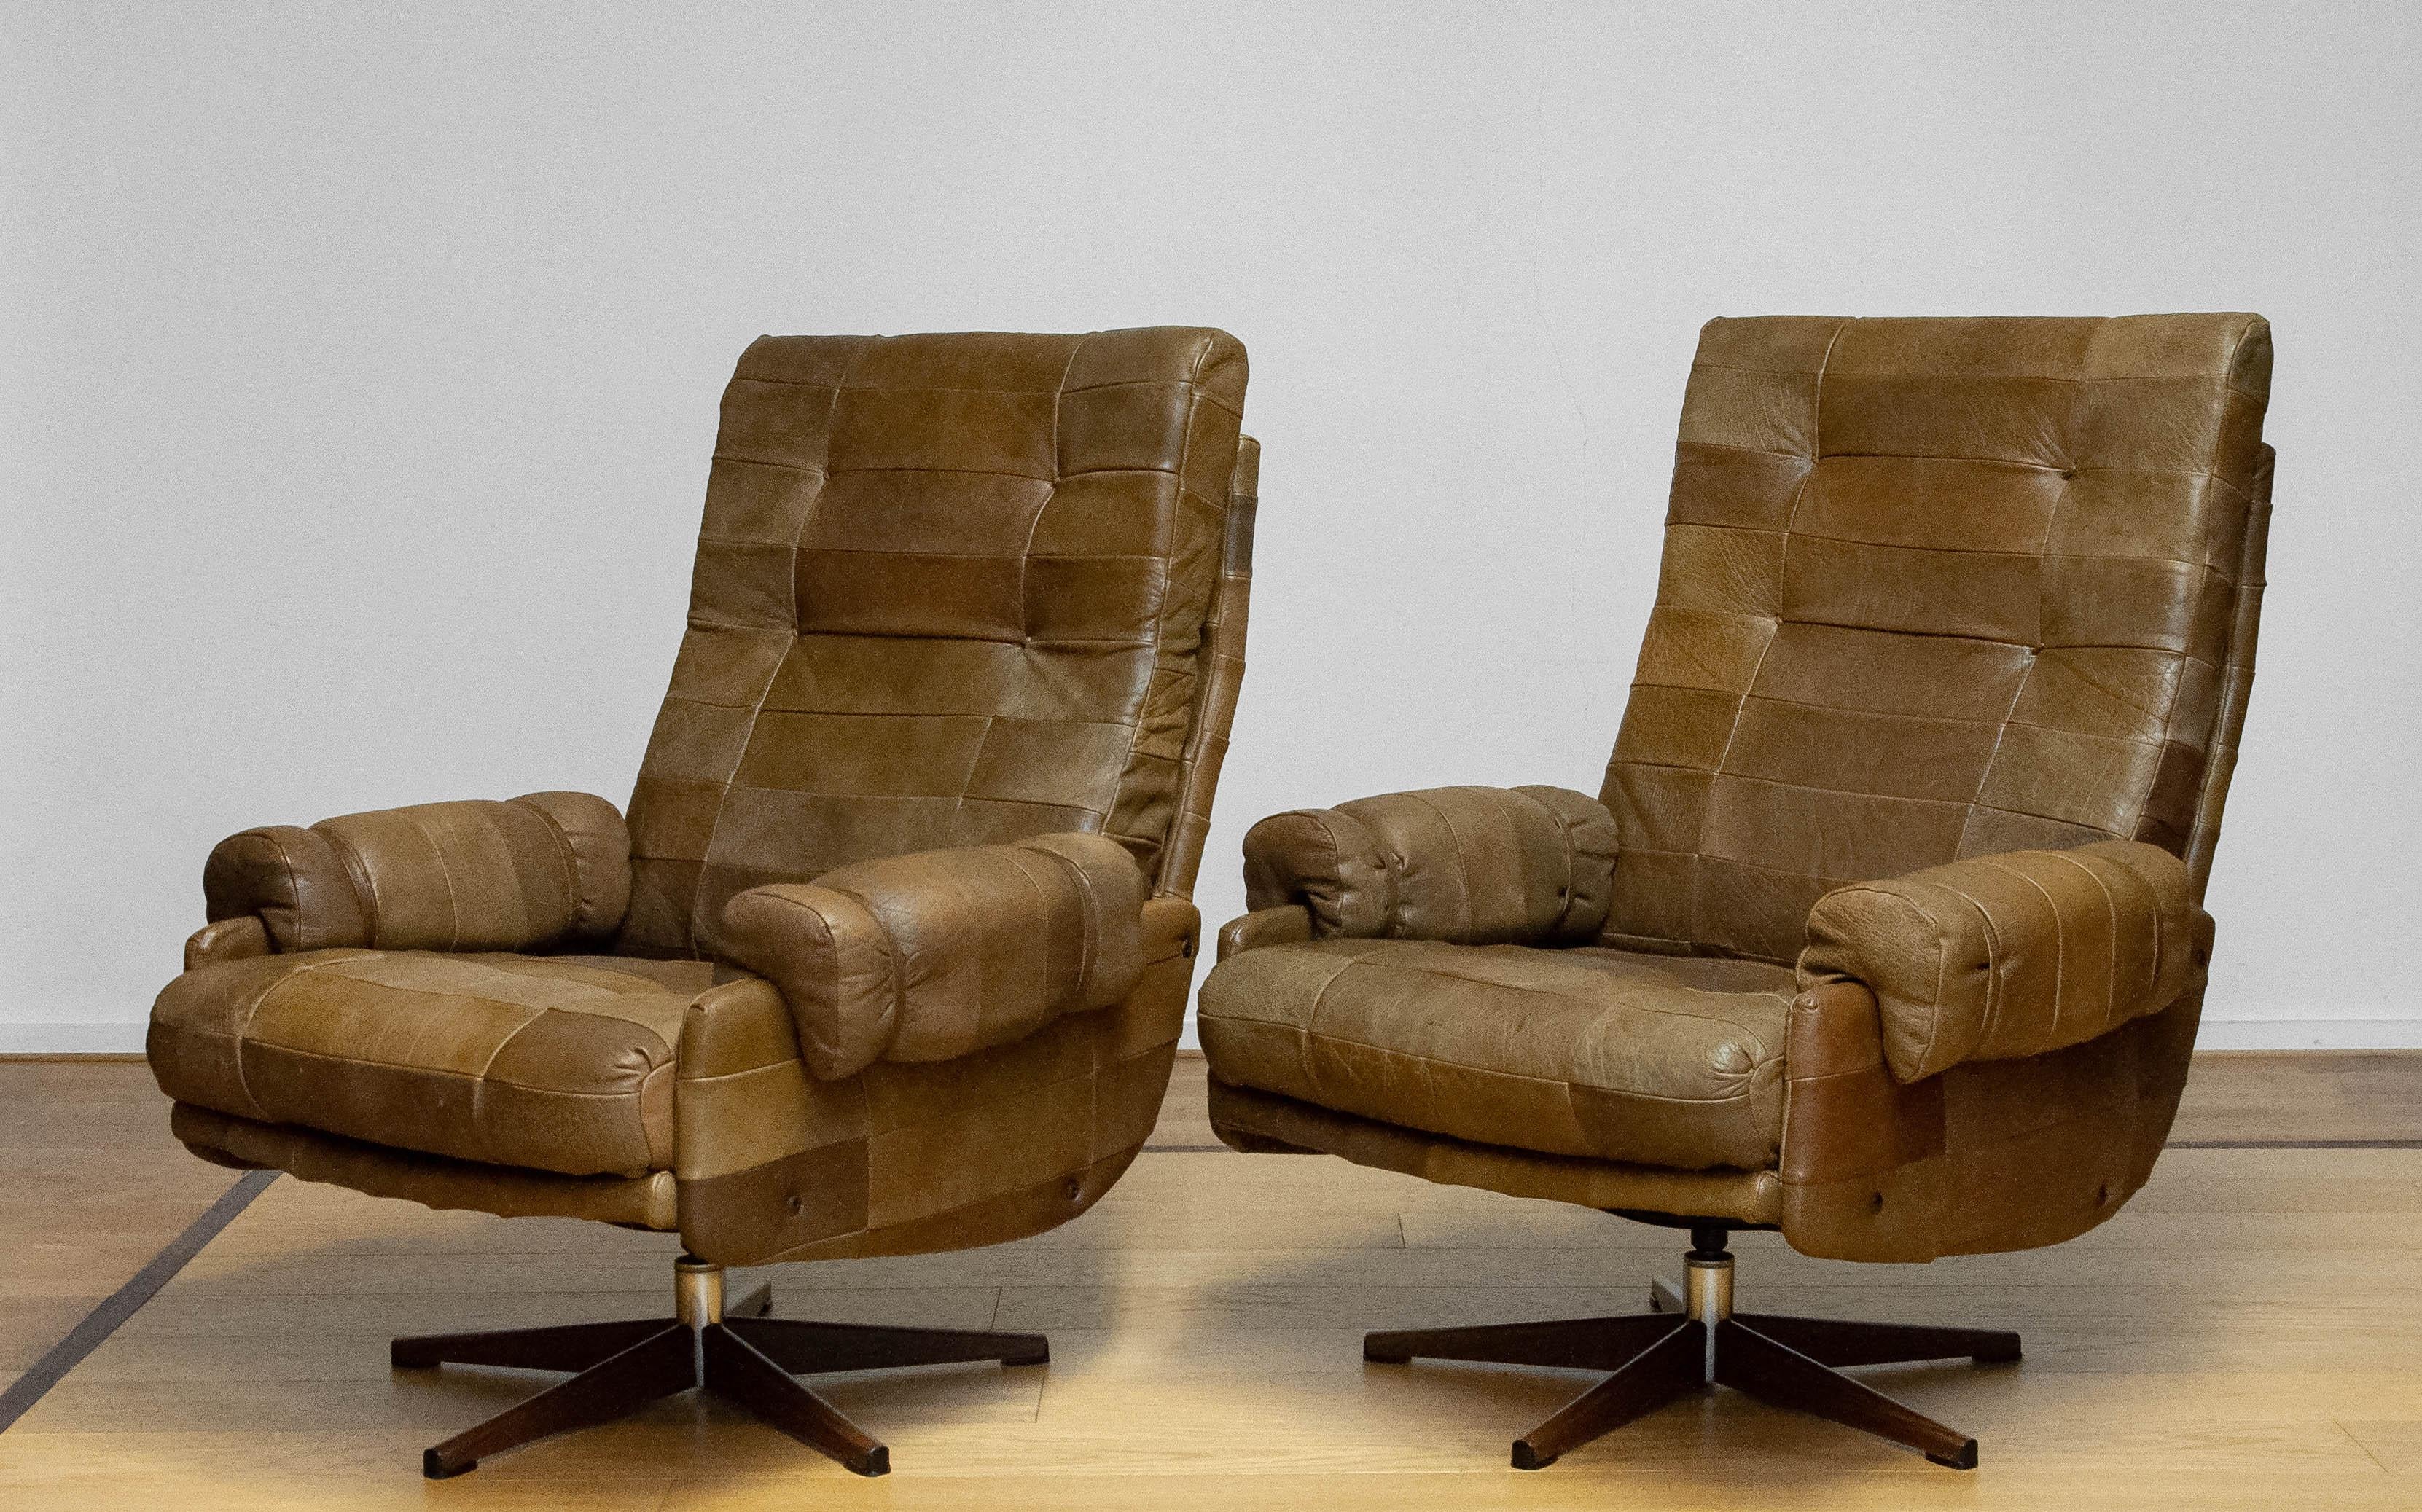 Extremely comfortable pair swivel chairs by Arne Norell For Norell Möbler AB in Sweden from the 1970s. The chairs are upholstered with beautiful and sturdy olive green ( patchwork ) buffalo leather. The chairs supports great and are absolutely made